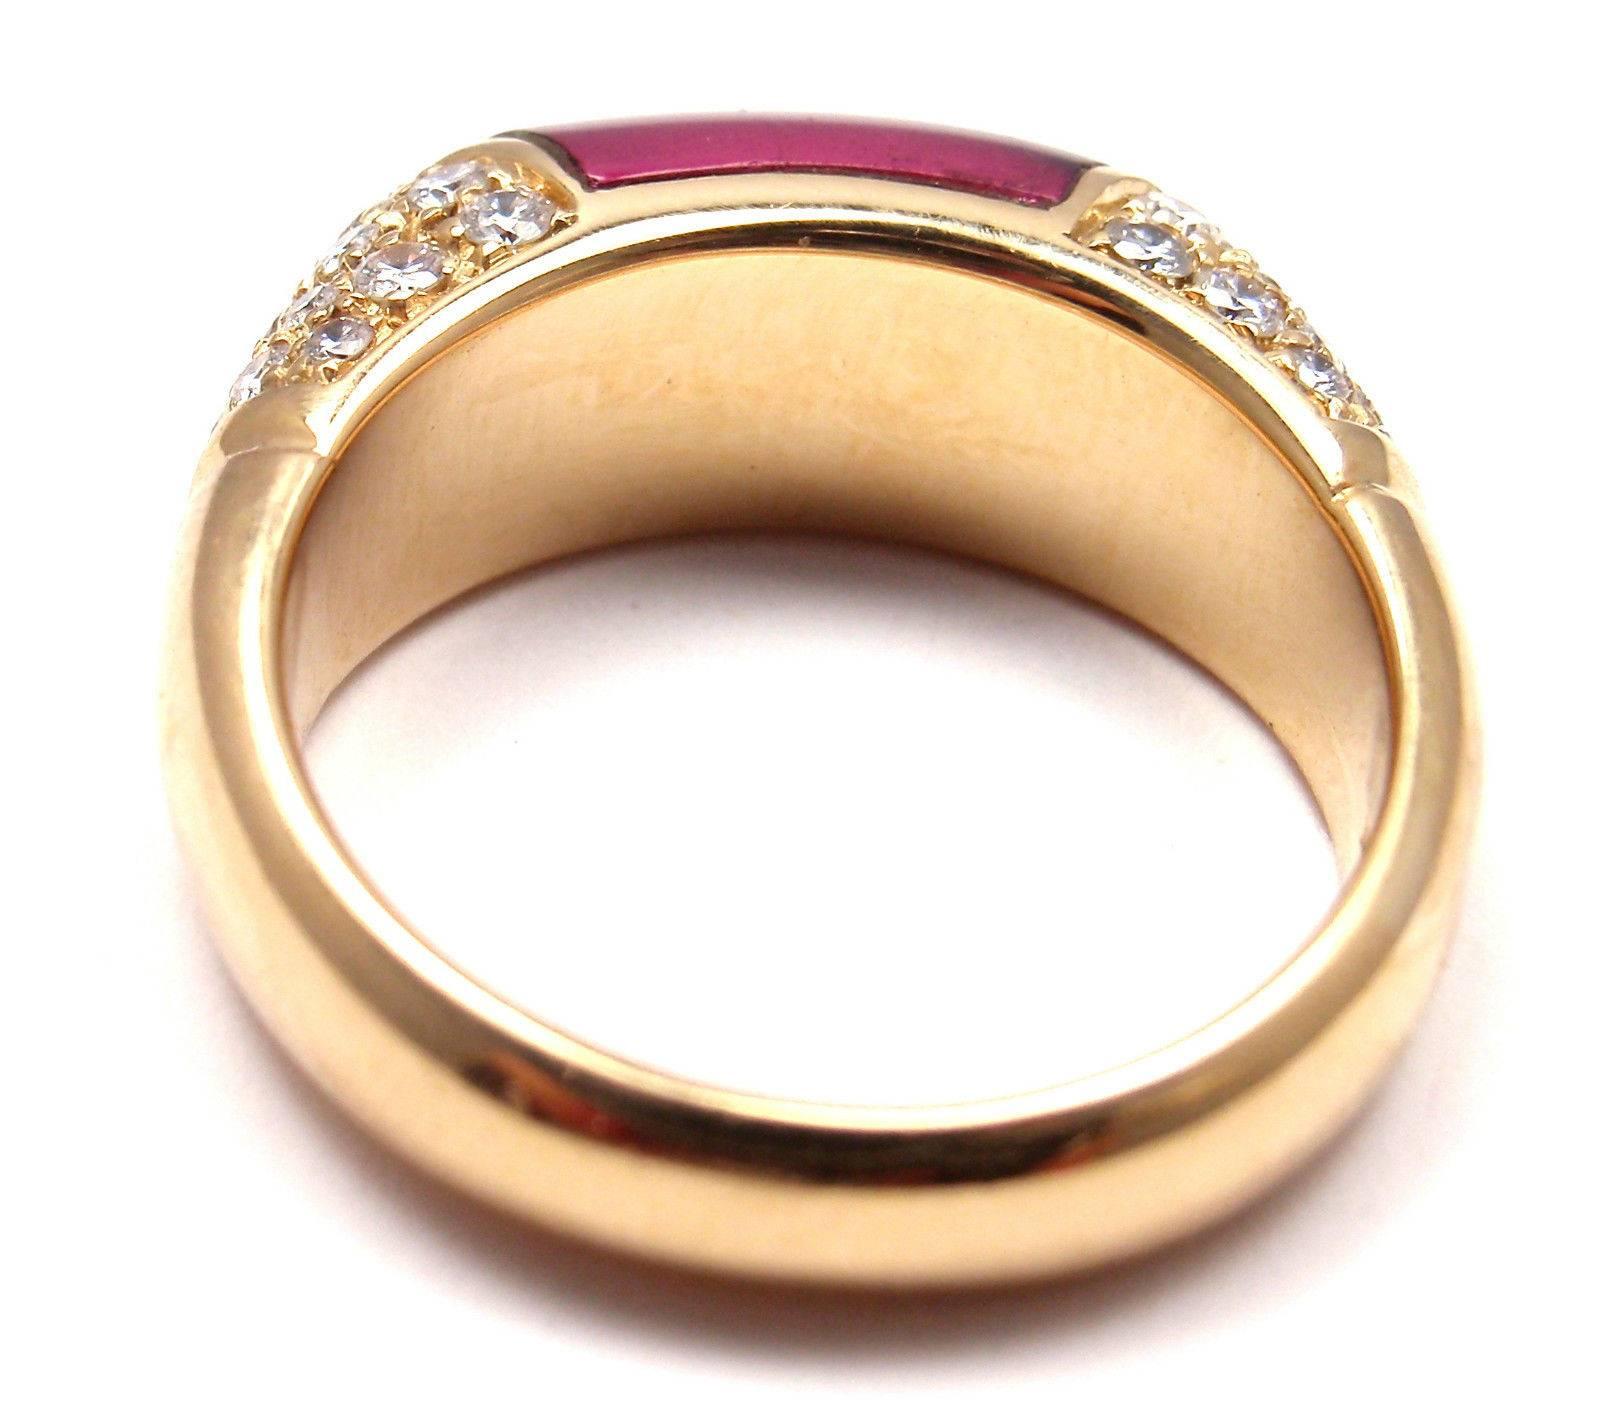 18k Yellow Gold Diamond Pink Tourmaline Ring by Bulgari. 
With 40 round brilliant cut diamonds VS1 clarity, G color total weight approx. .60ct
1 pink tourmaline 15mm x 7mm
This ring comes with original Bvlgari box.

Details:  
Ring Size: 5.5